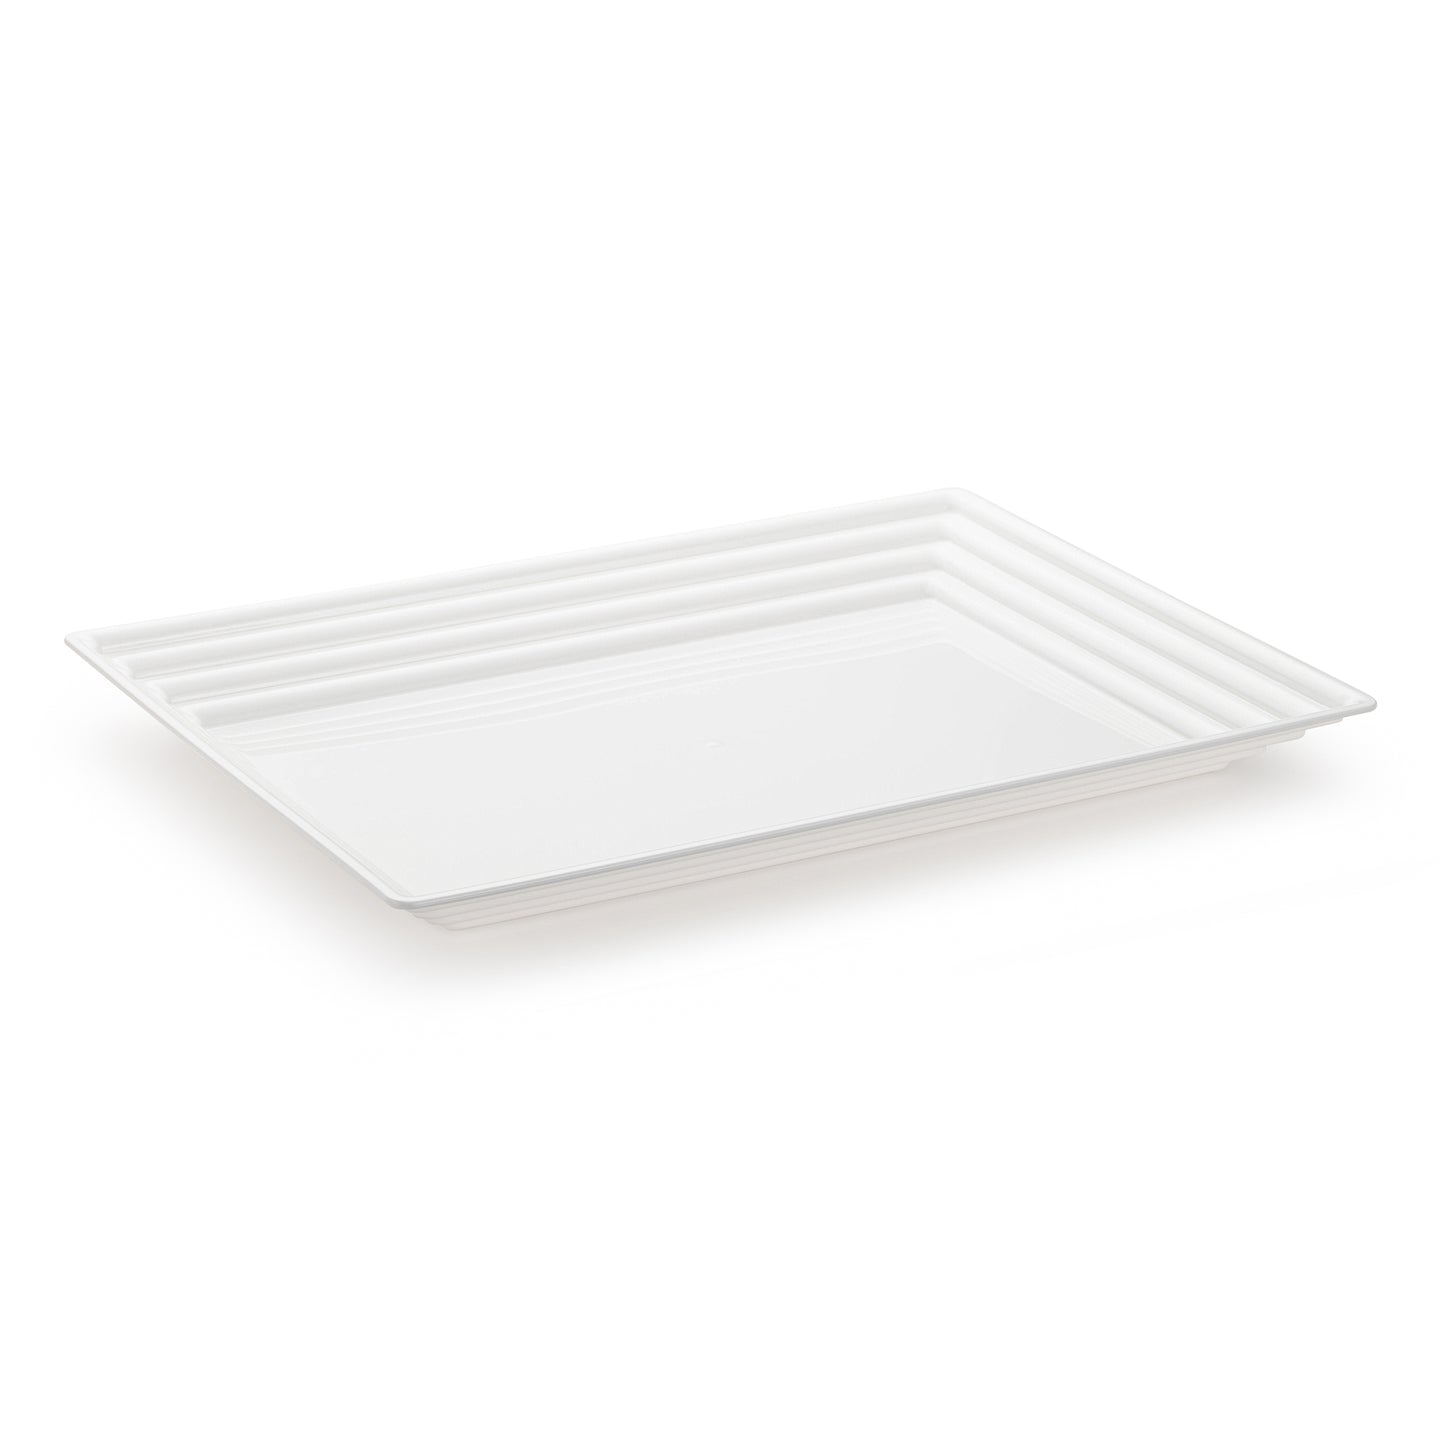 11" x 16" White Rectangular with Groove Rim Disposable Plastic Serving Trays